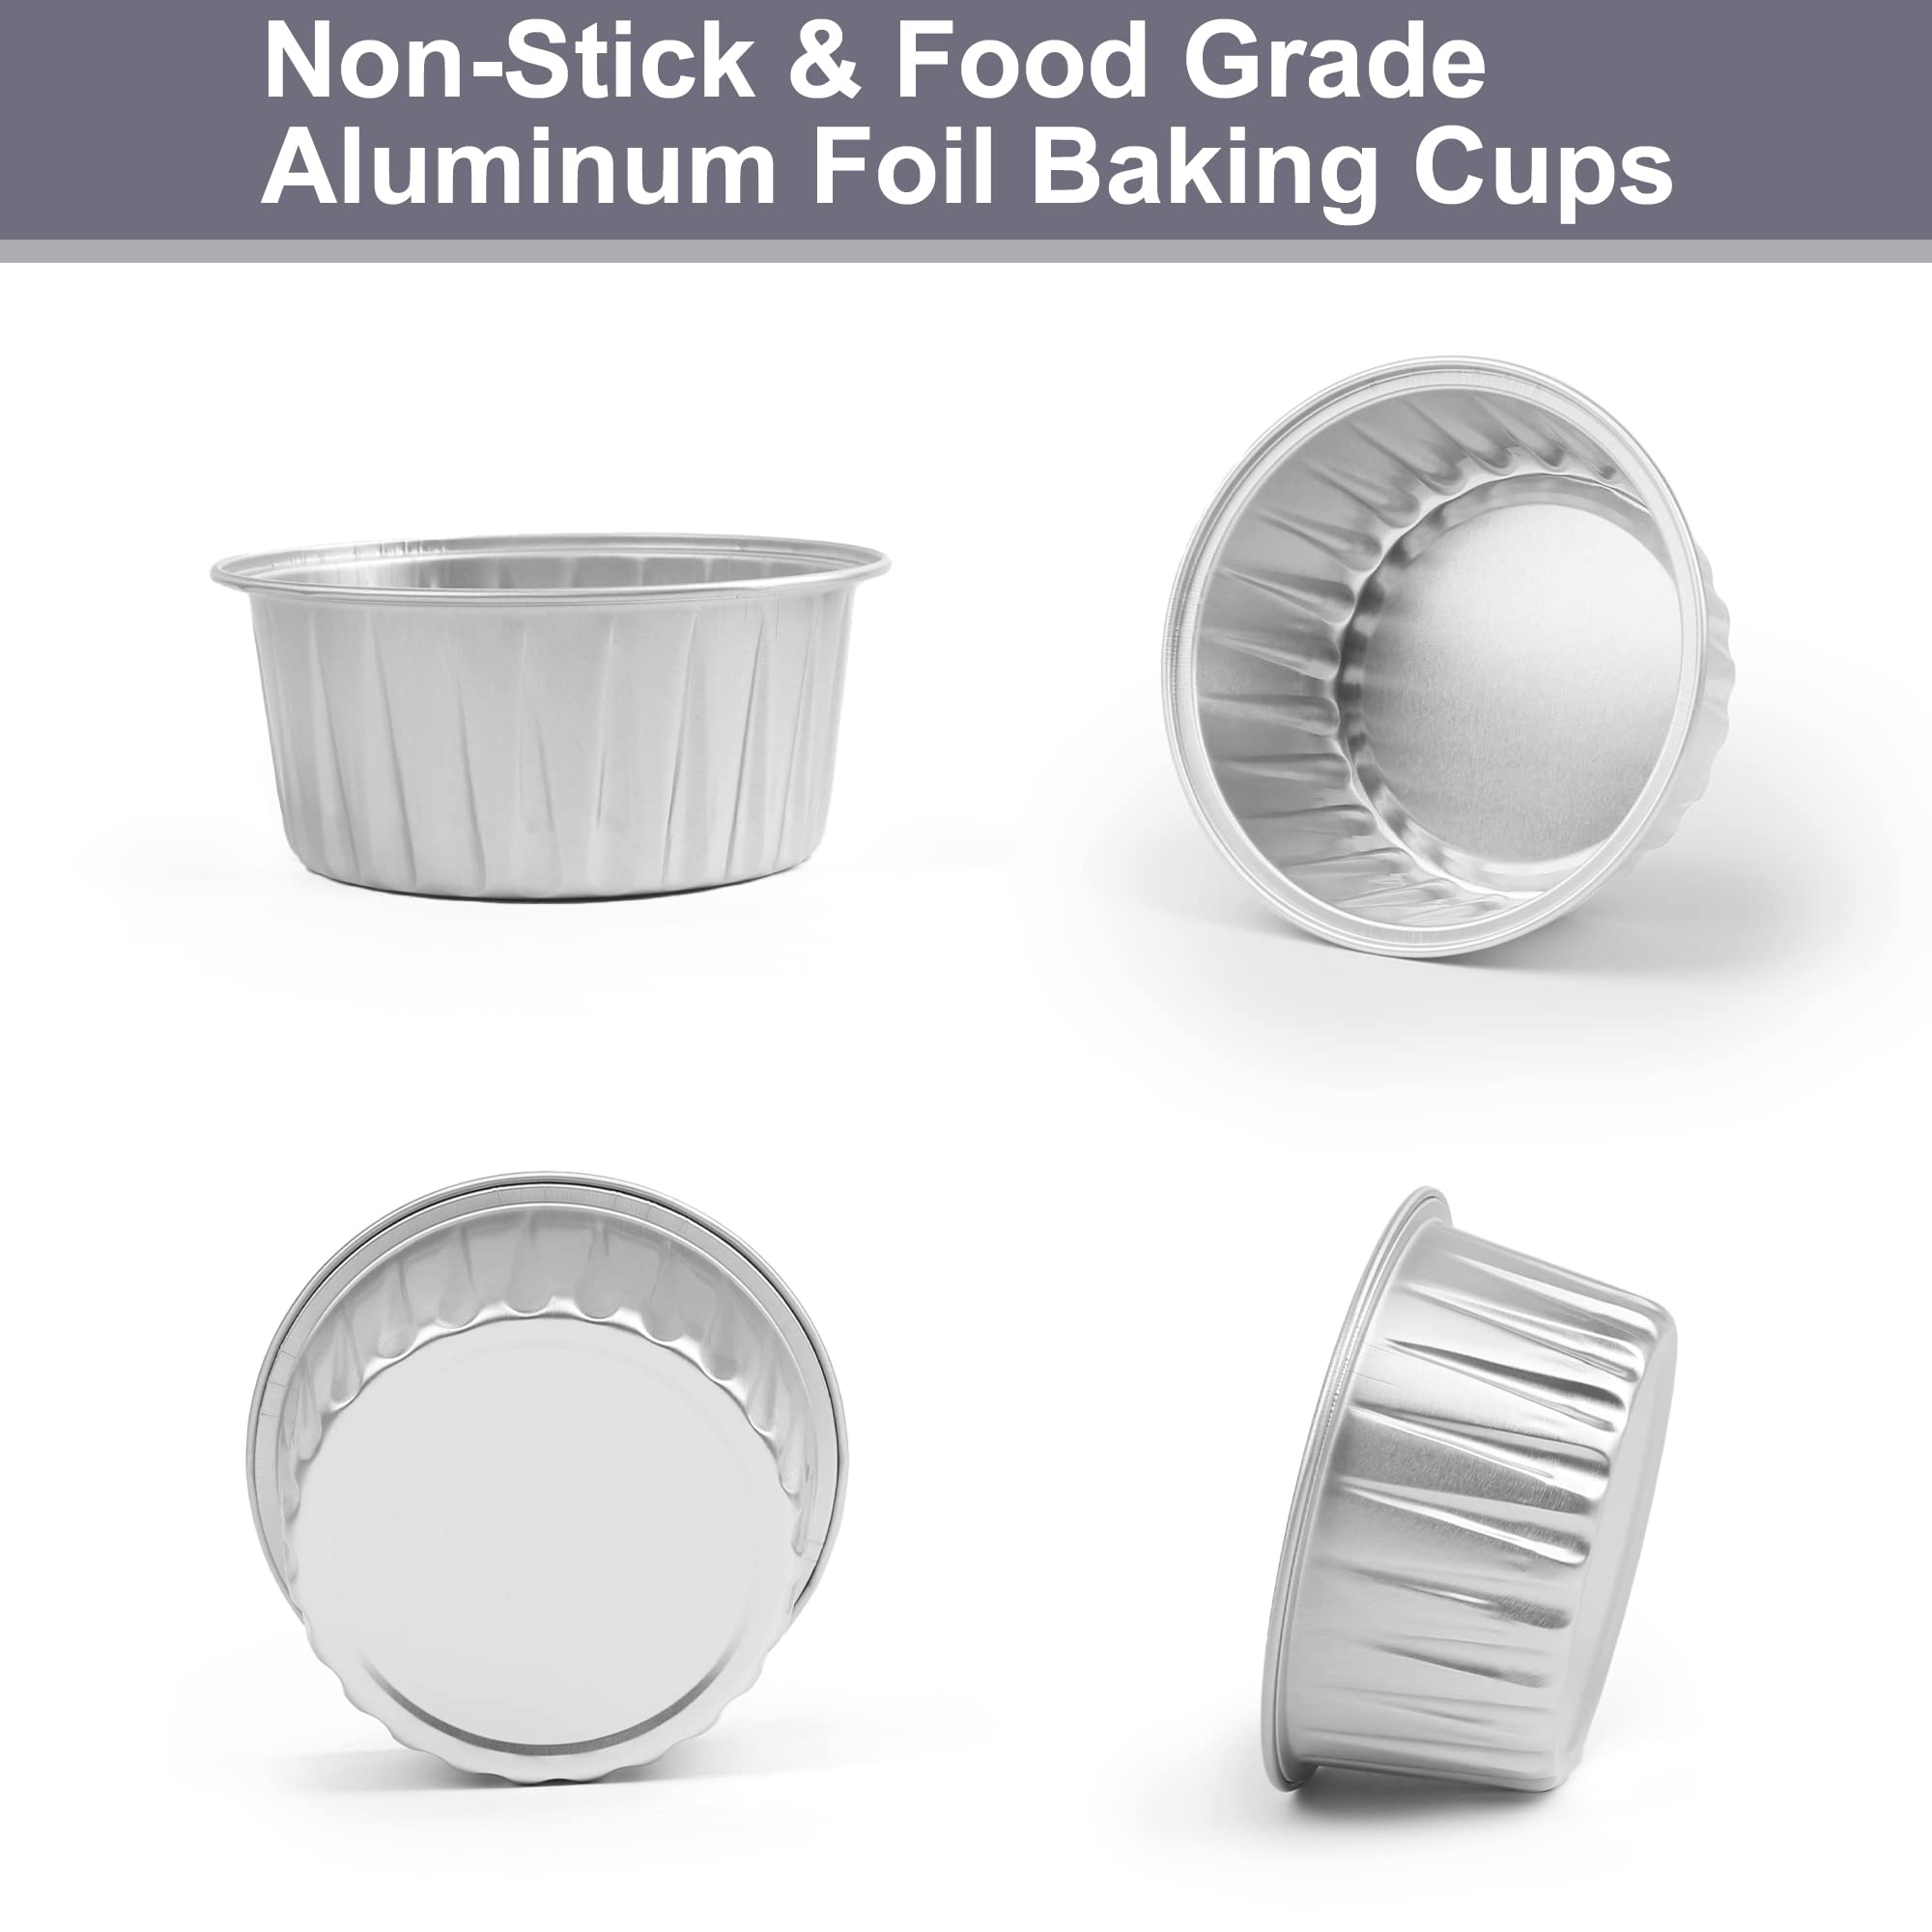 LotFancy Aluminum Foil Cupcake Baking Cups with Lids and Spoons, 5oz/125ml, 50 Pack Disposable Creme Brulee Ramekins, Oven Safe Mini Cake Tins Muffin Cups, Silver